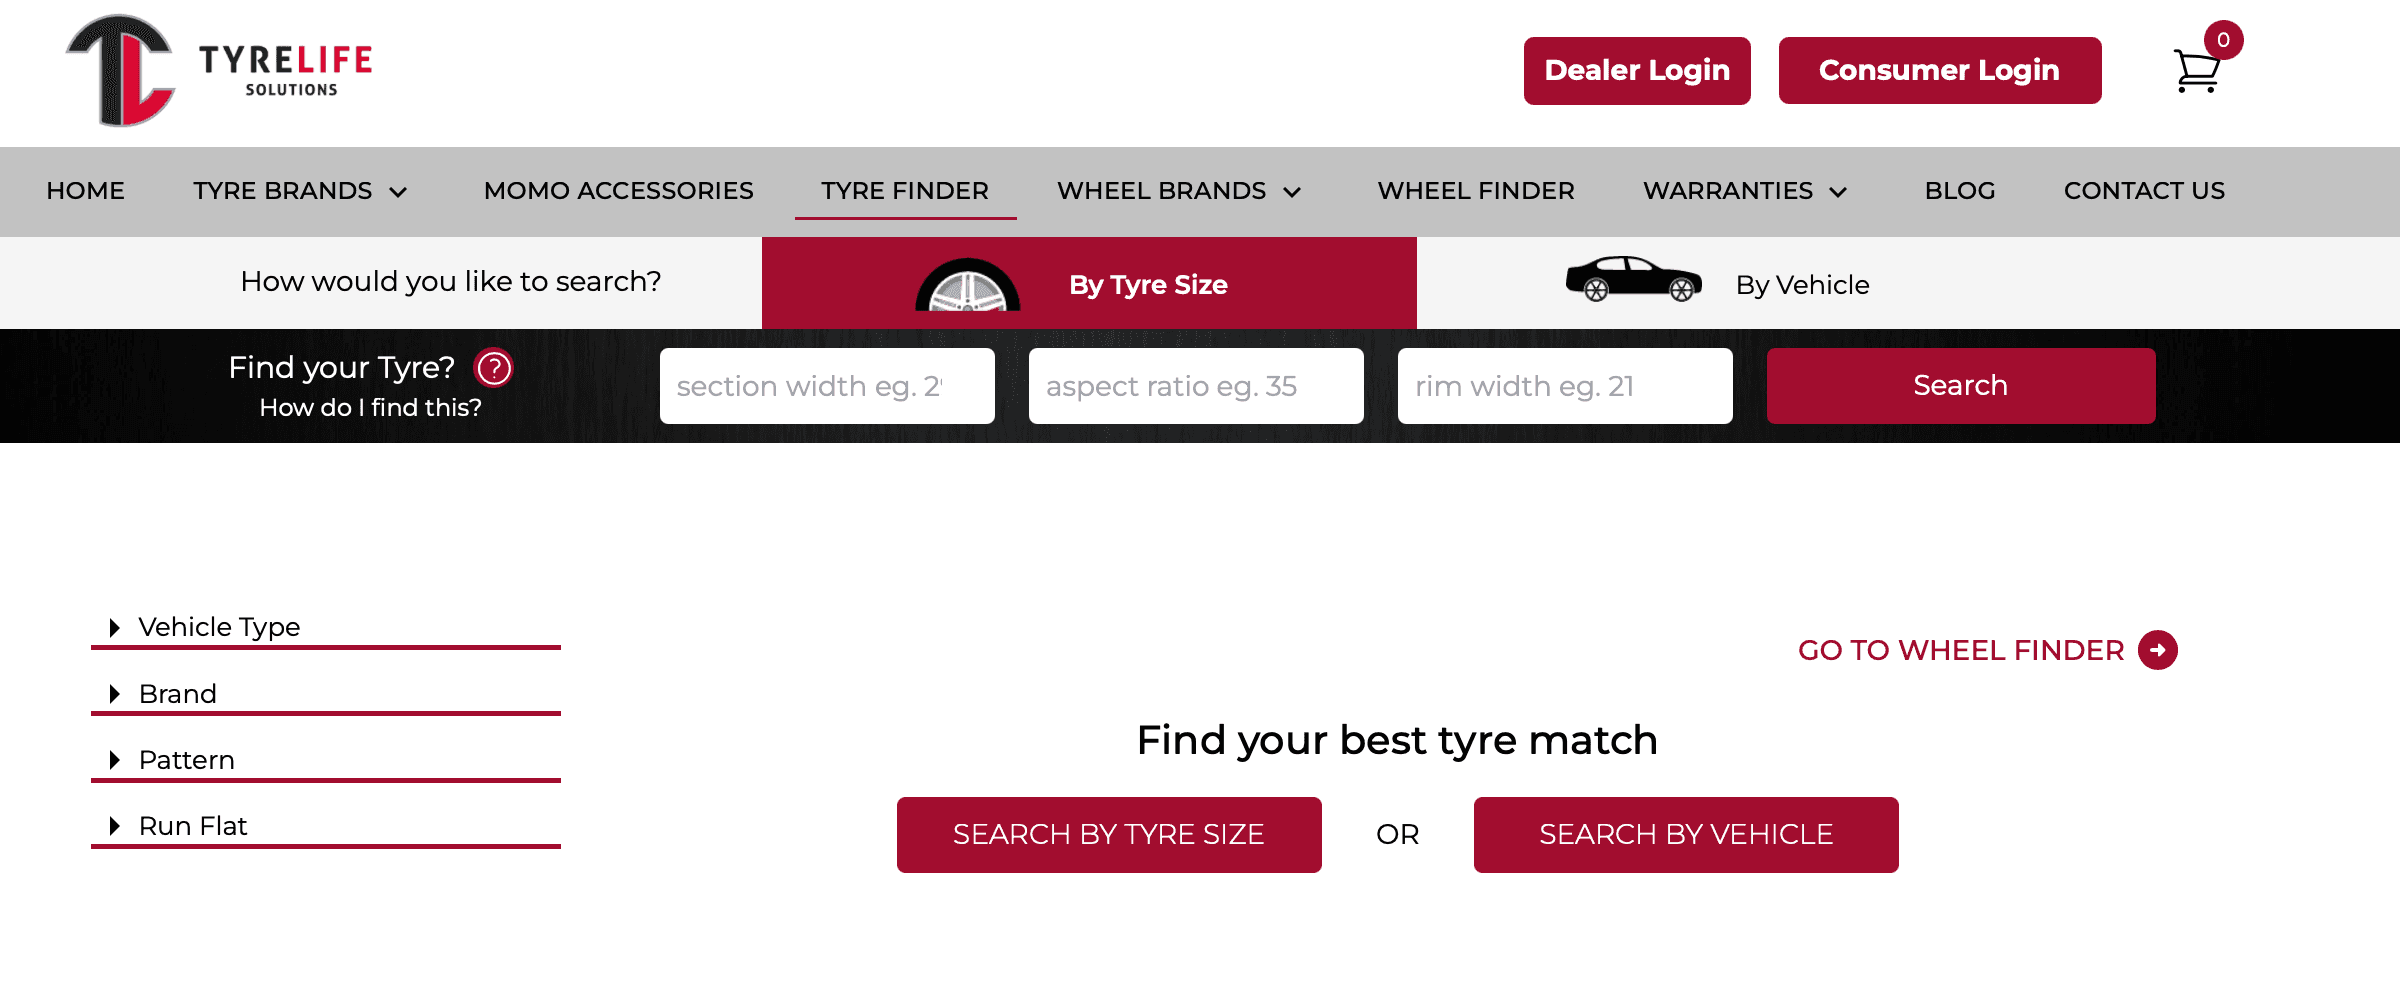 BUY TYRES ONLINE DIRECT FROM THE WHOLESALER